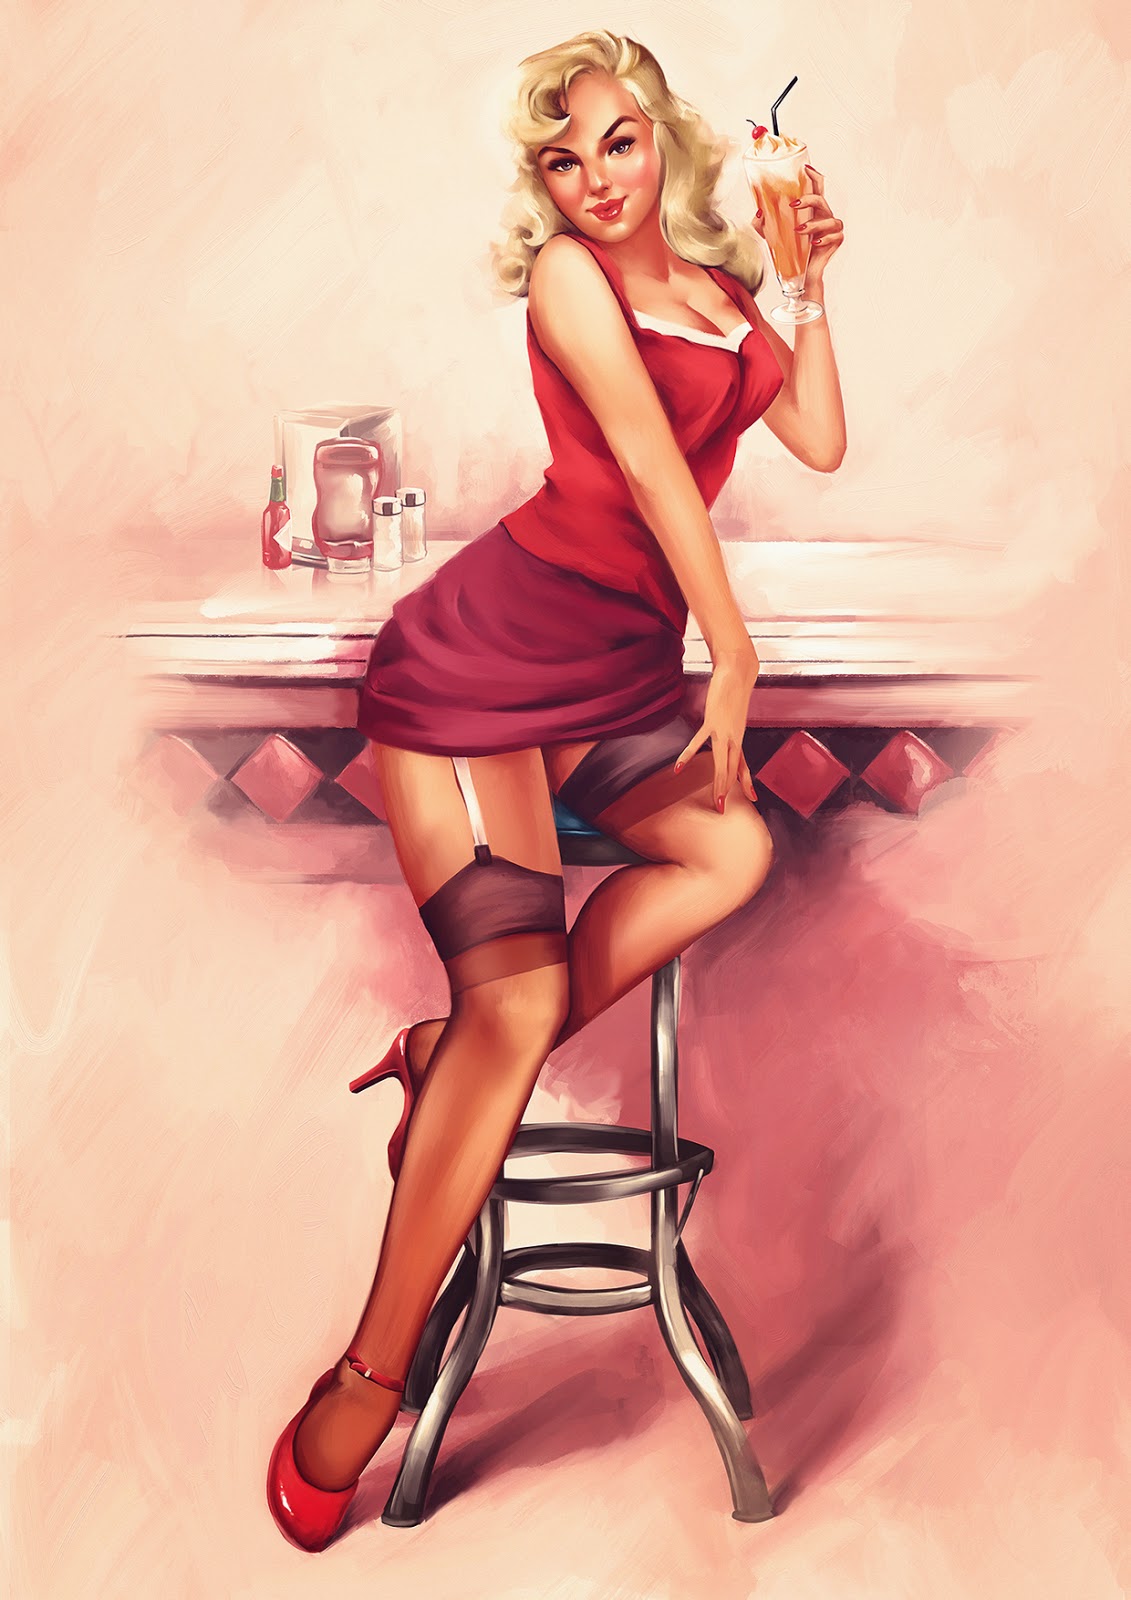 Guilherme Asthma – Pin Up And Cartoon Girls Art Vintage And Modern